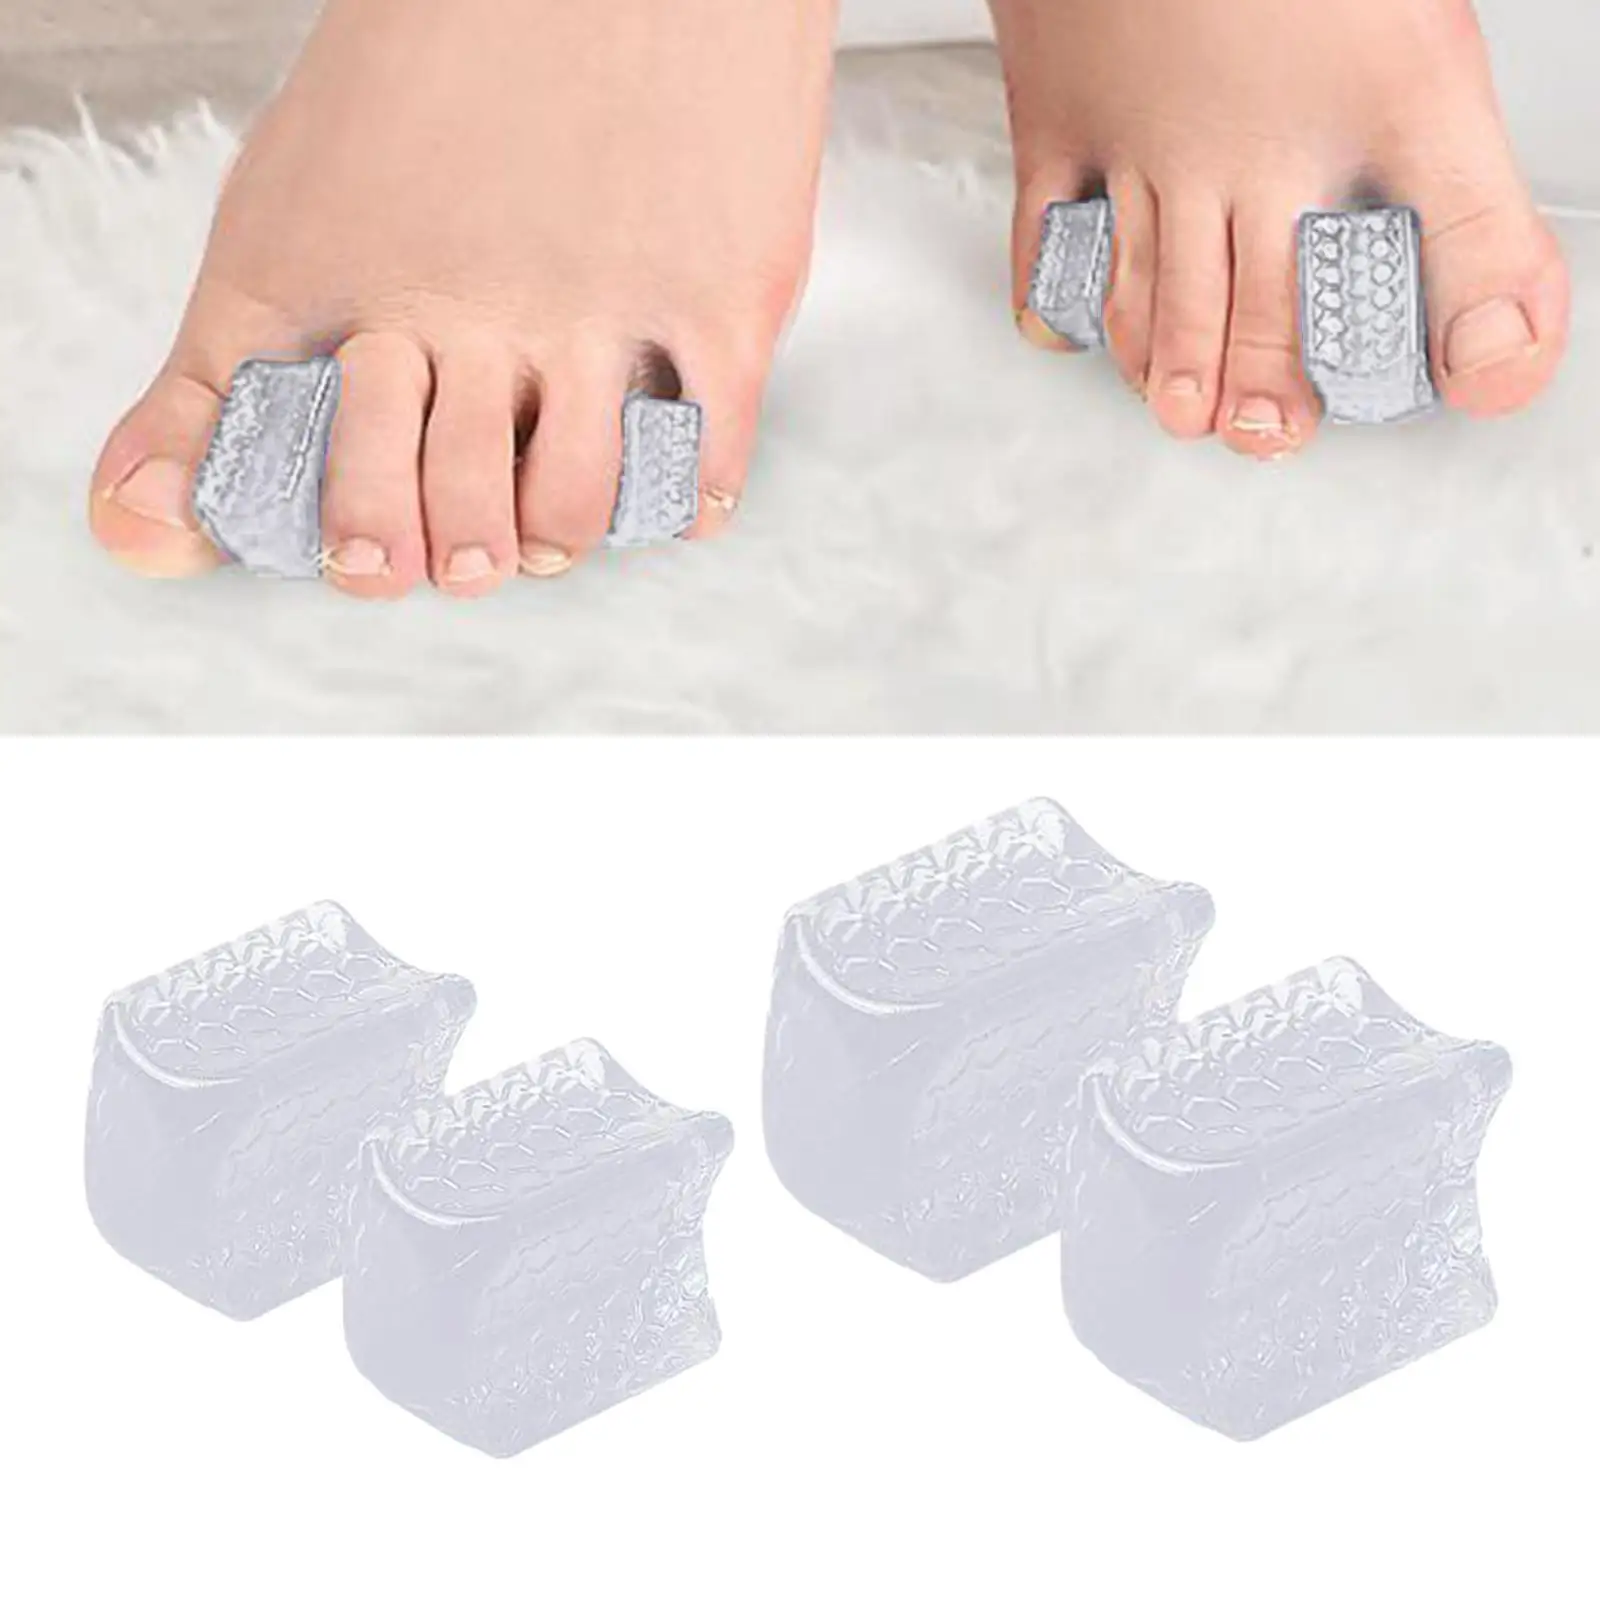 4Pcs Silicone Toe Separators Stretcher Separate Curled Overlapping Toe